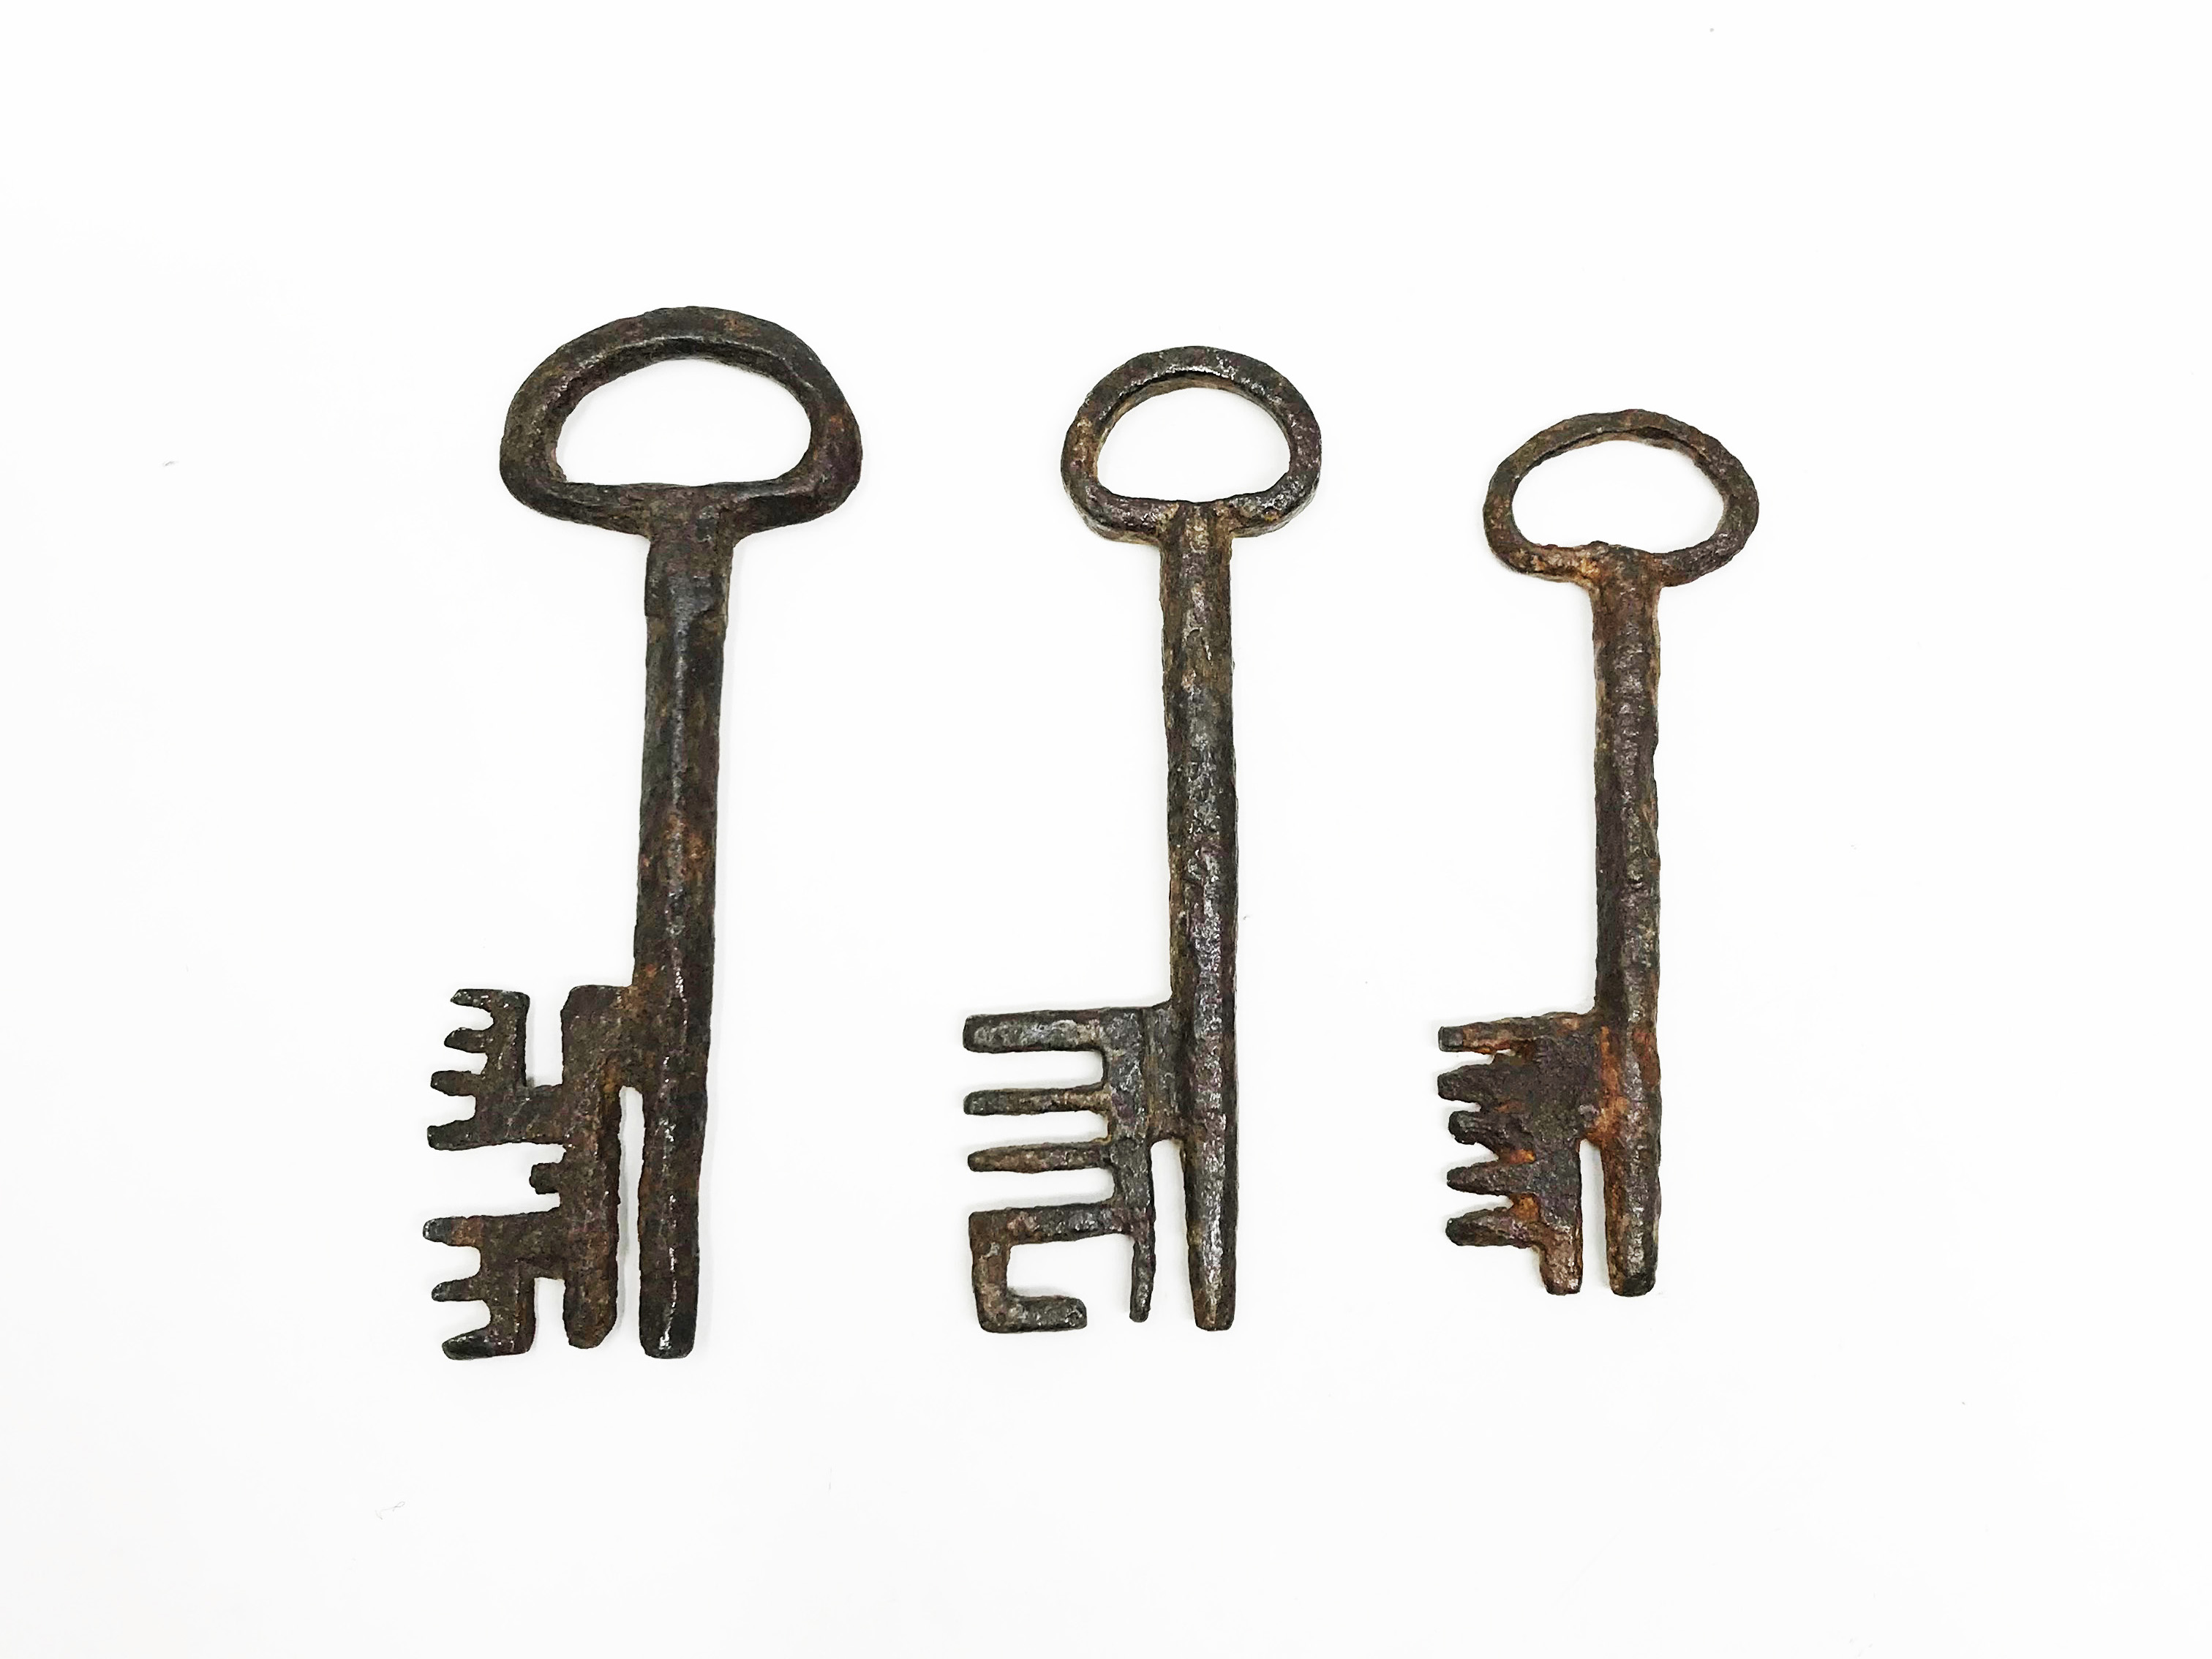 Three gothic keys9,06 - 8, 46 - 7,63 cm. Part of the chapter "From the Time of the Cathedrals".